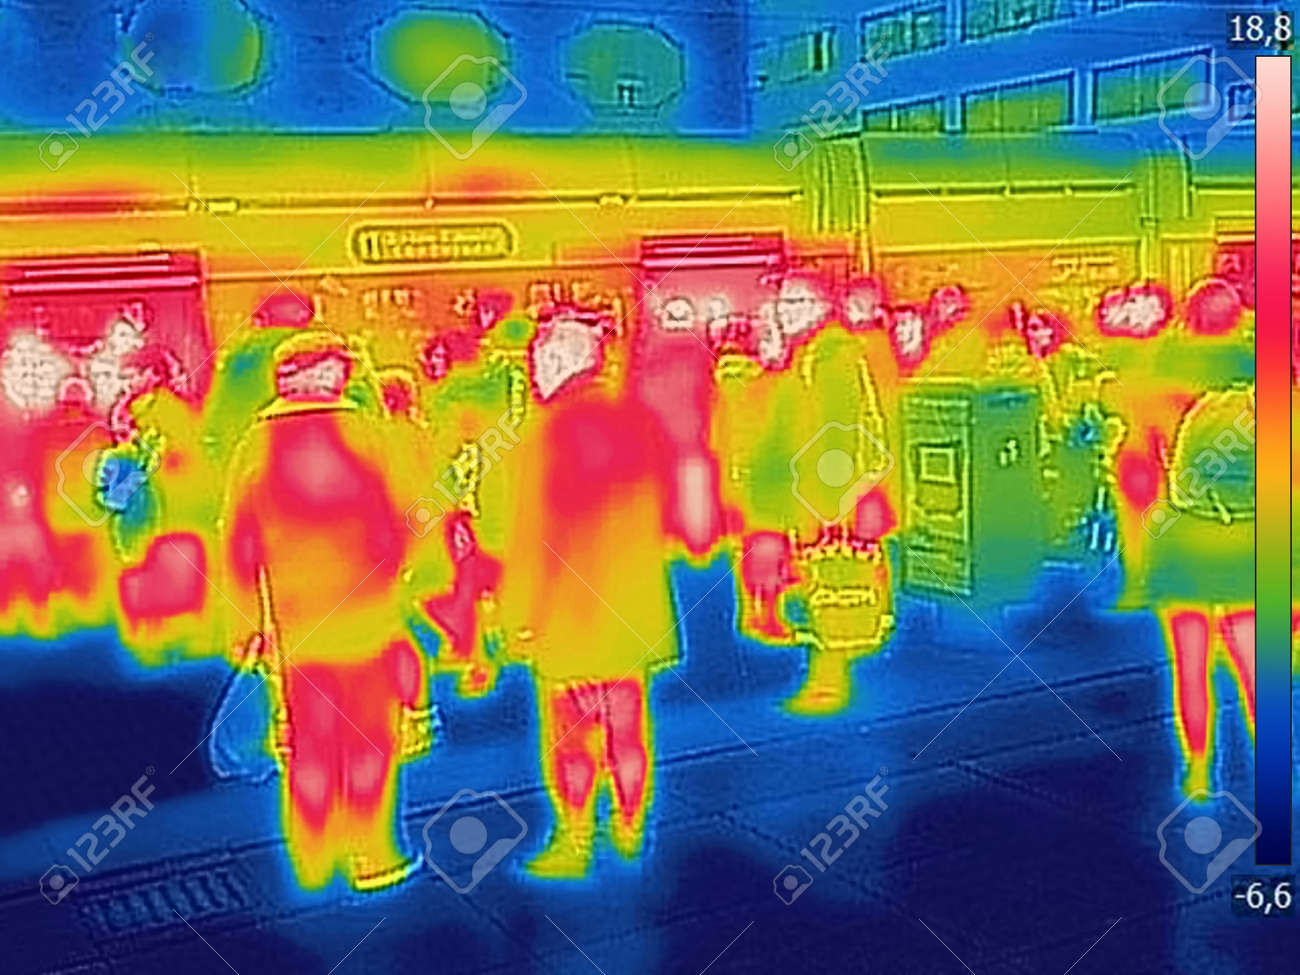 119774459-infrared-thermal-image-of-people-at-the-city-railway-station-on-a-cold-winter-day.jpg